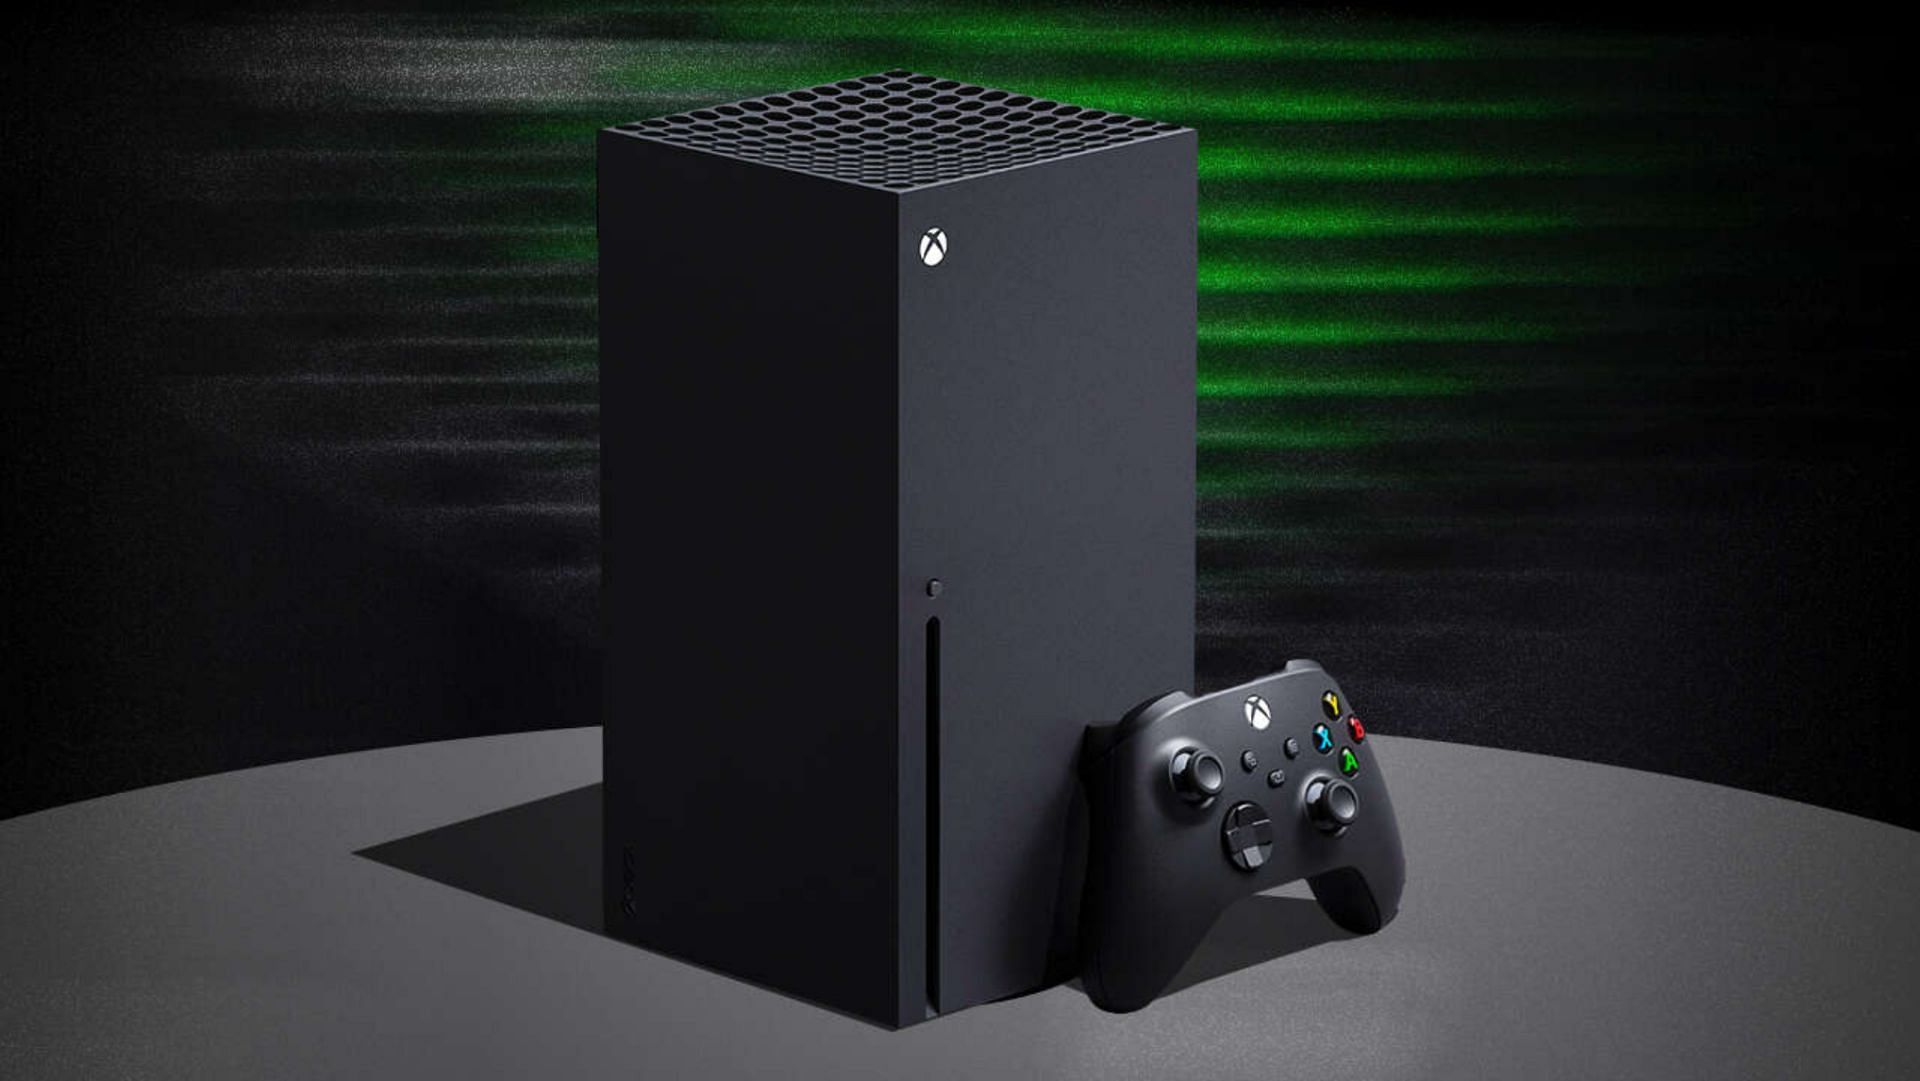 Black Friday Xbox Series X Deals, Xbox Series X Accessories and Games - News